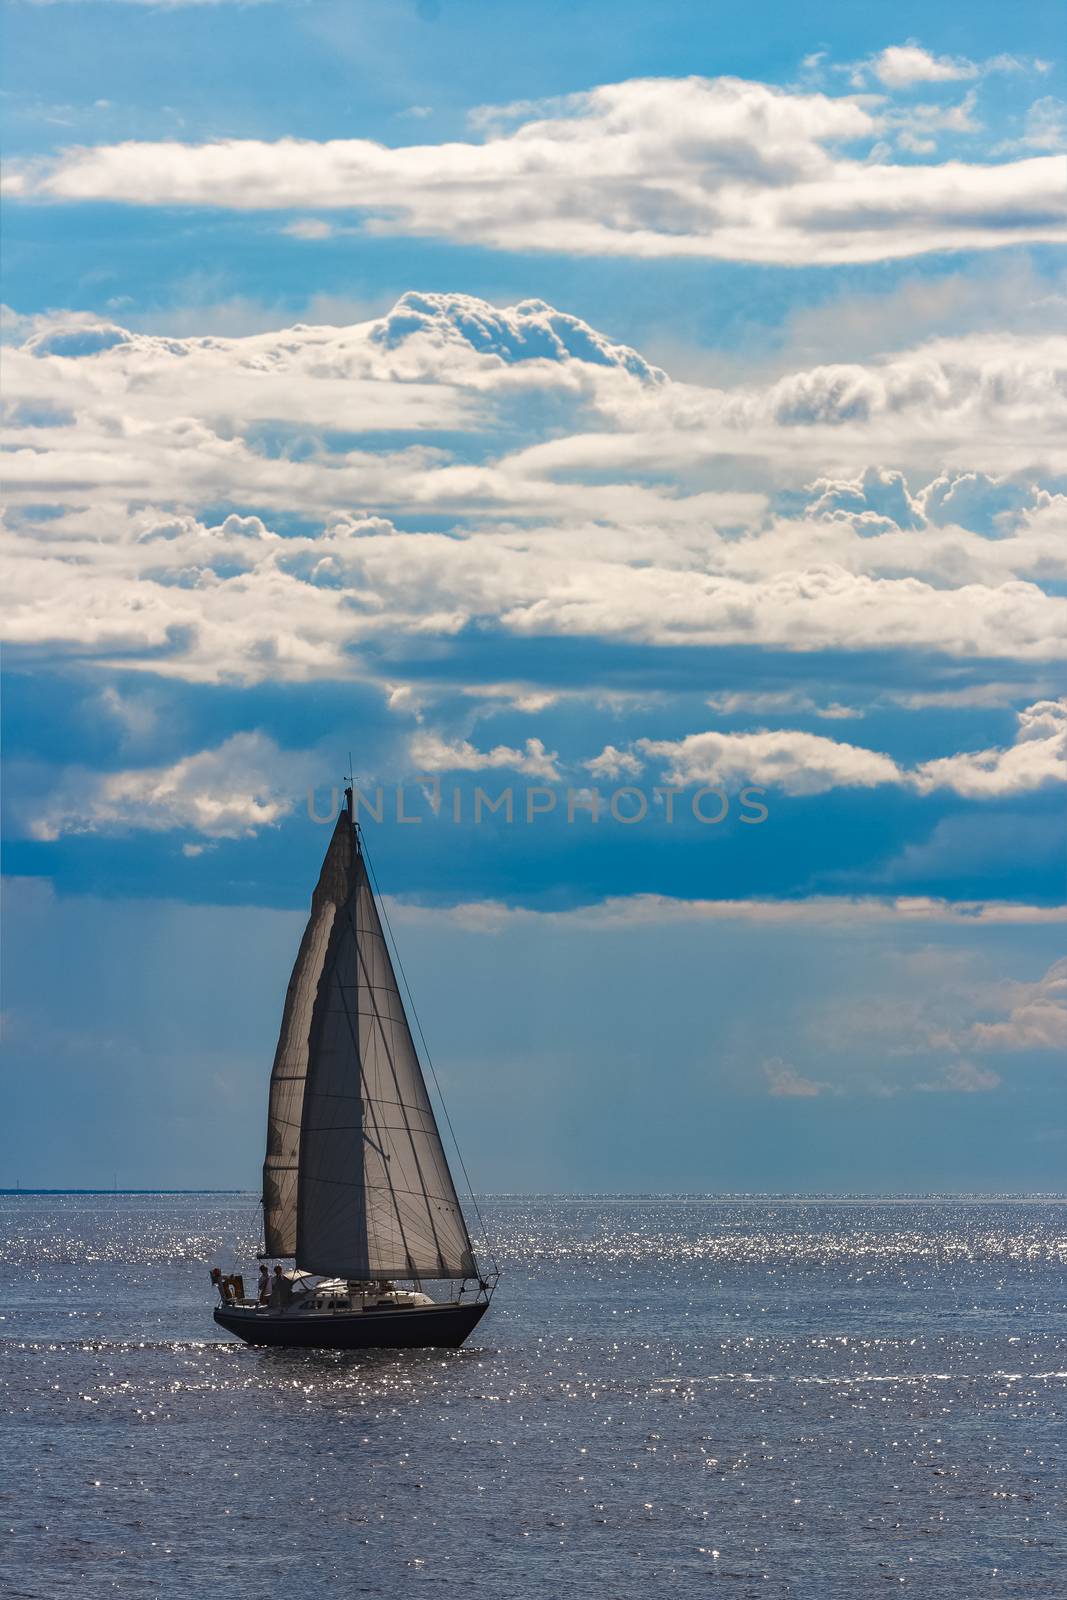 Blue sailboat in travel by Europe. Sea journey